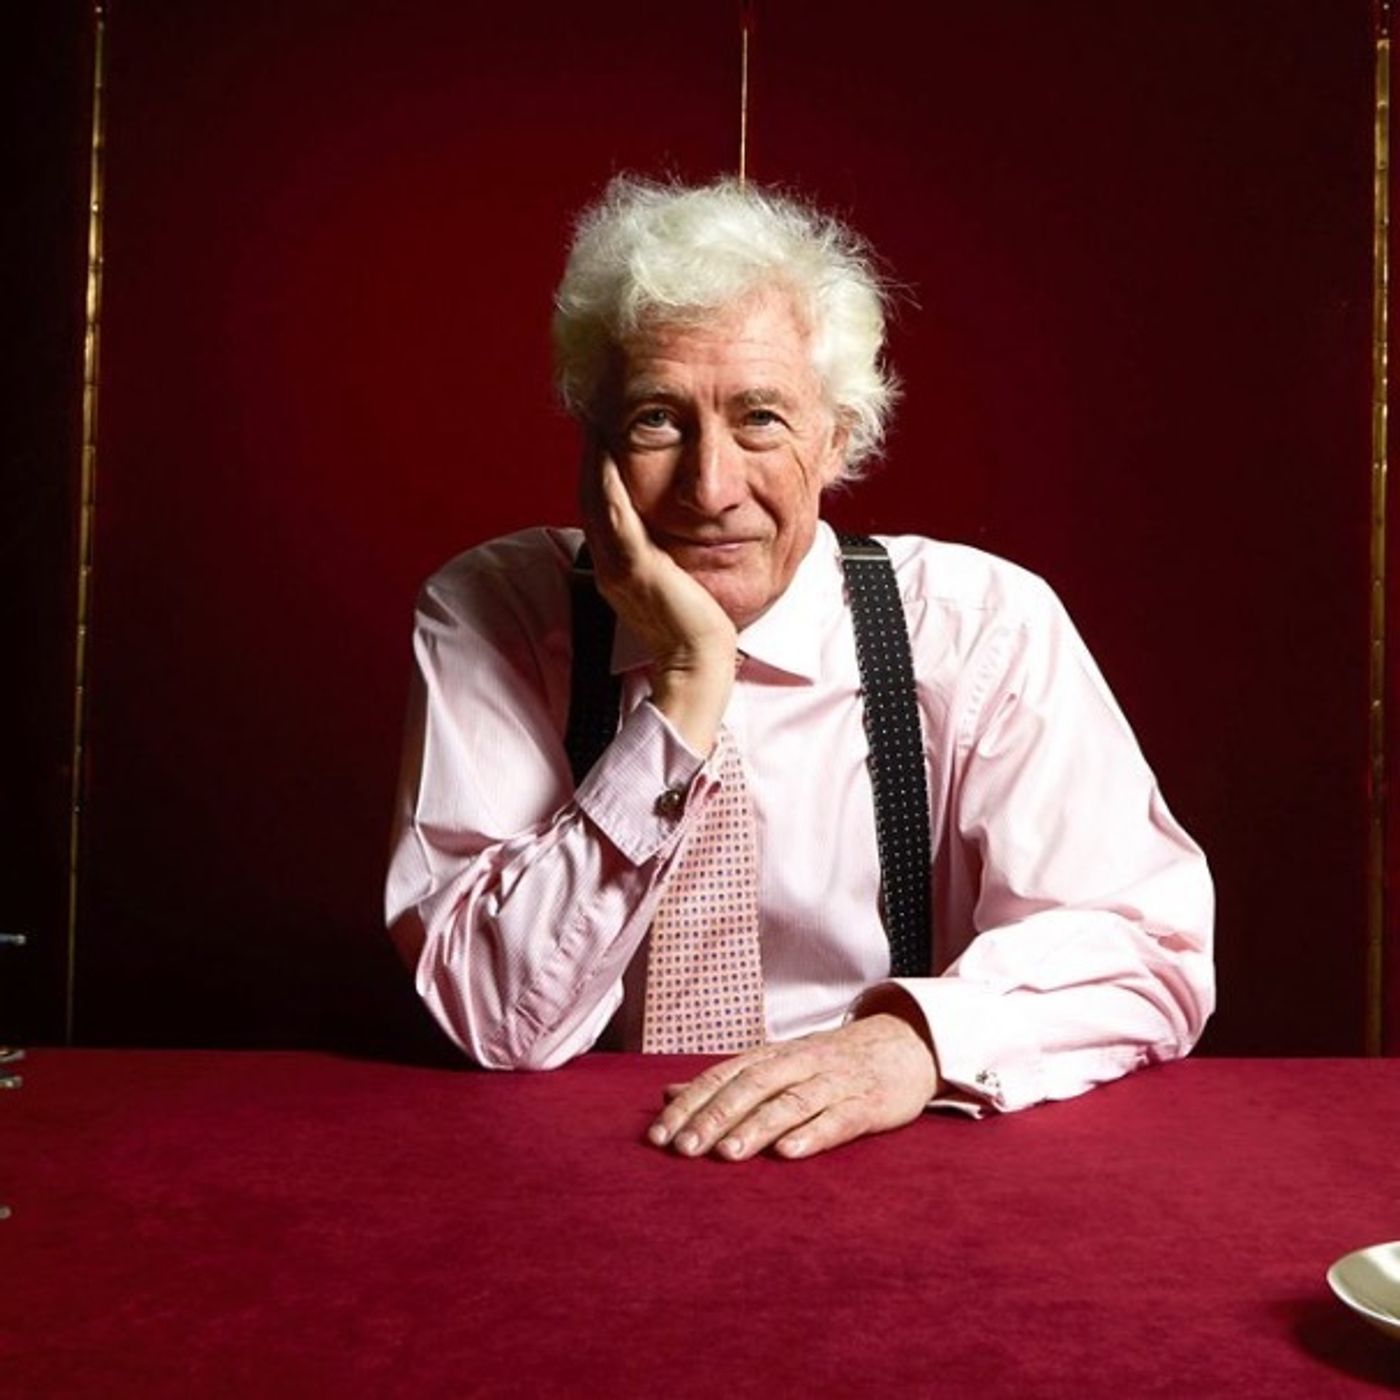 169: Government Control over the Flow of Information: Lord Sumption on the Online Safety Bill